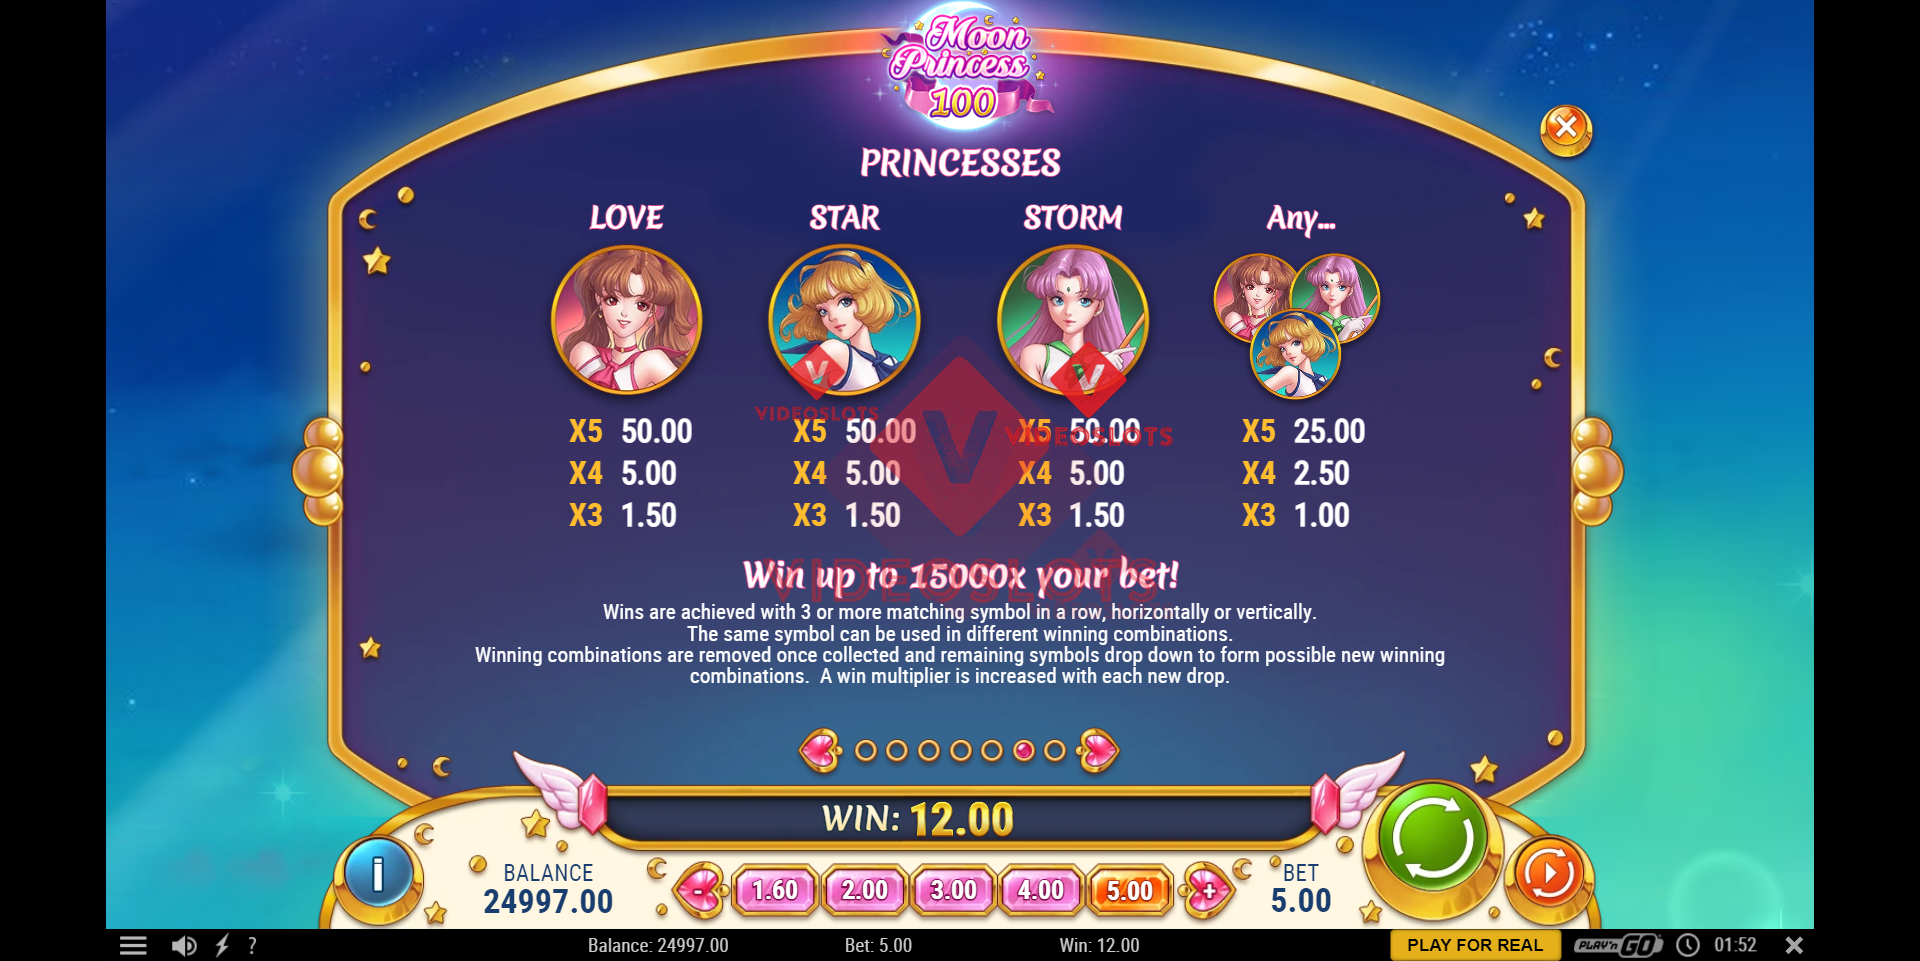 Pay Table for Moon Princess 100 slot from Play'n Go